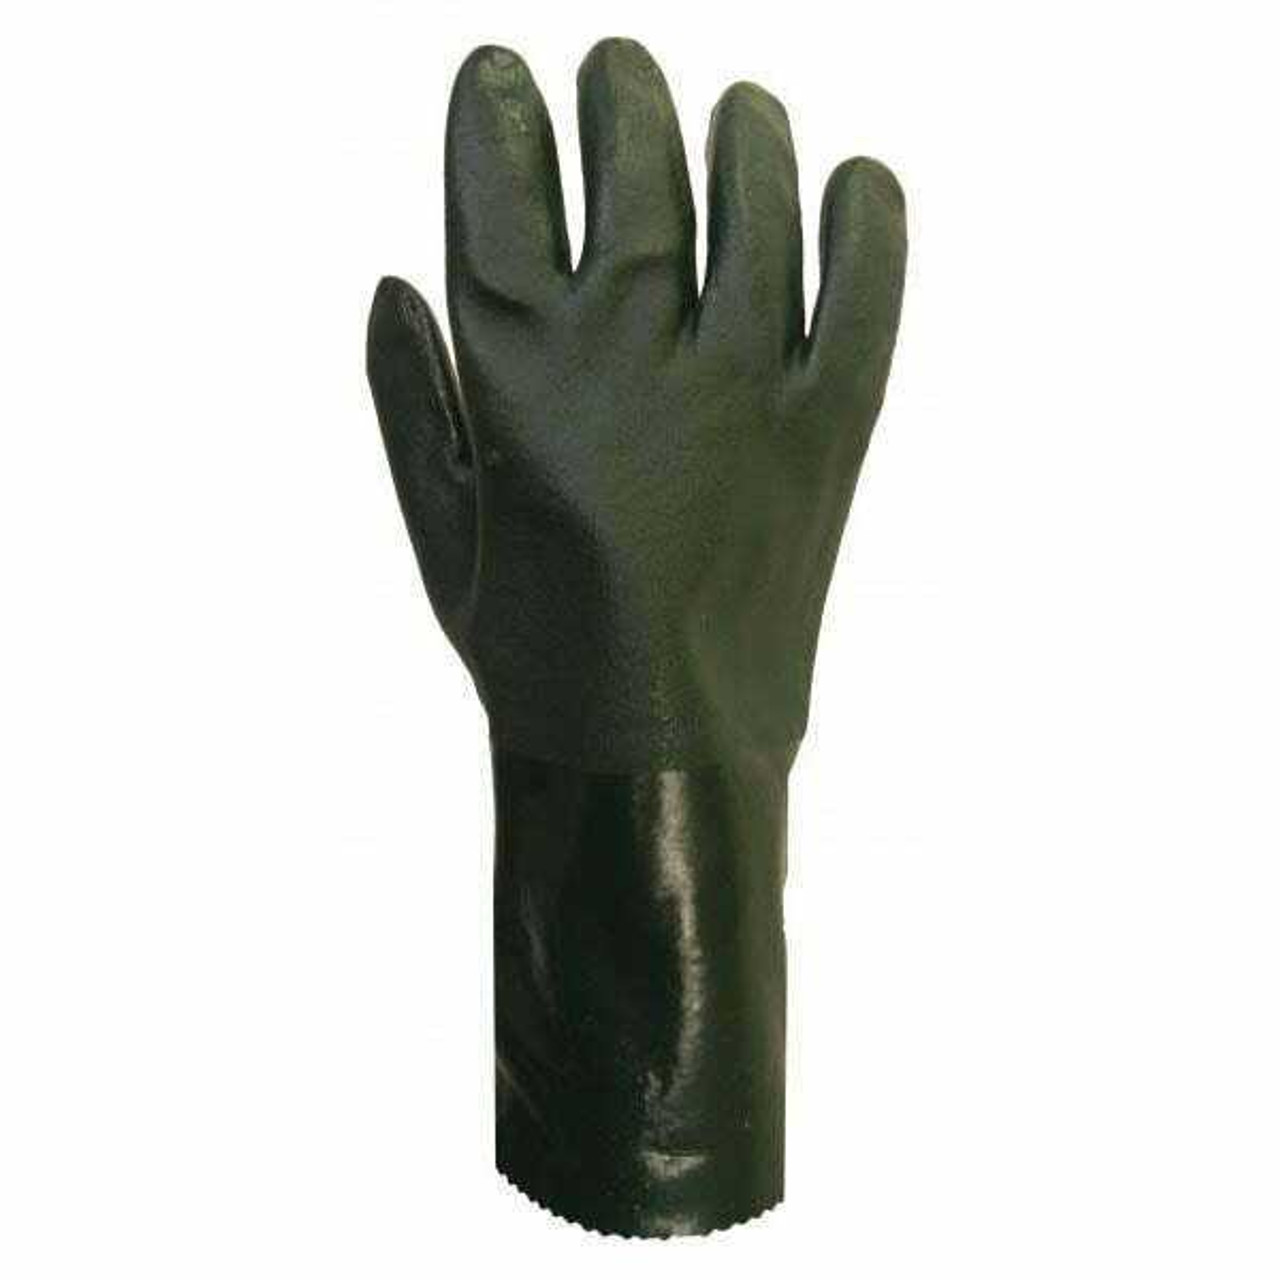 Double Dipped, Green PVC Glove With 3 Cuff Styles (72 pairs or 144 pairs / case)